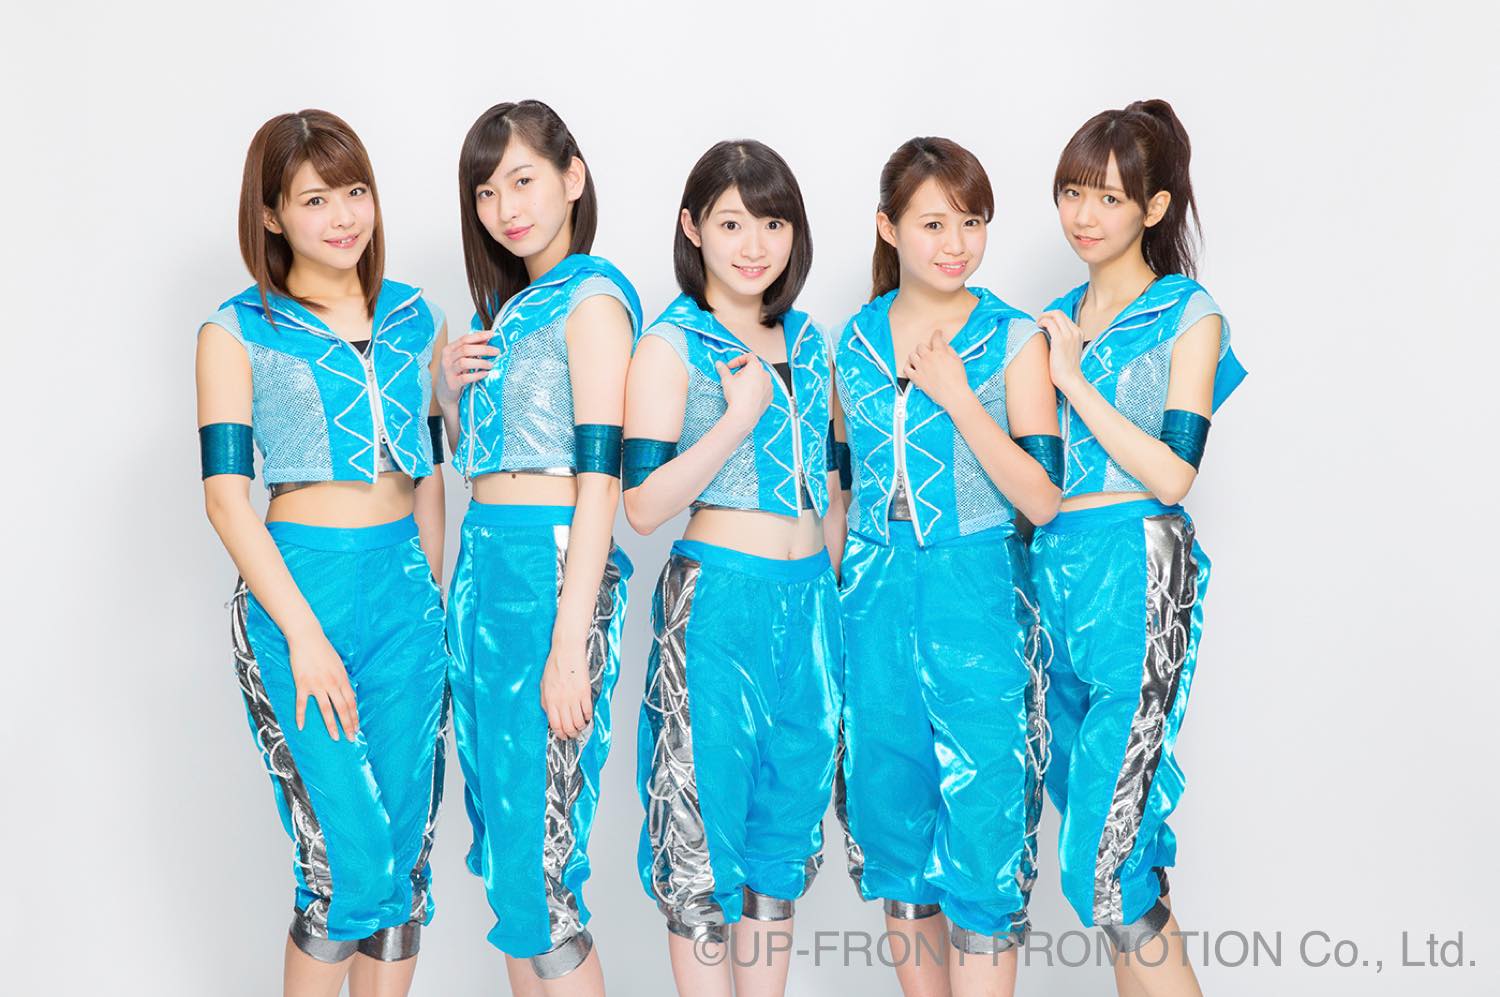 ℃-ute to Perform Their Final Overseas Concerts in Mexico and Paris! Passes the Torch to Juice=Juice: First World Tour Announcement